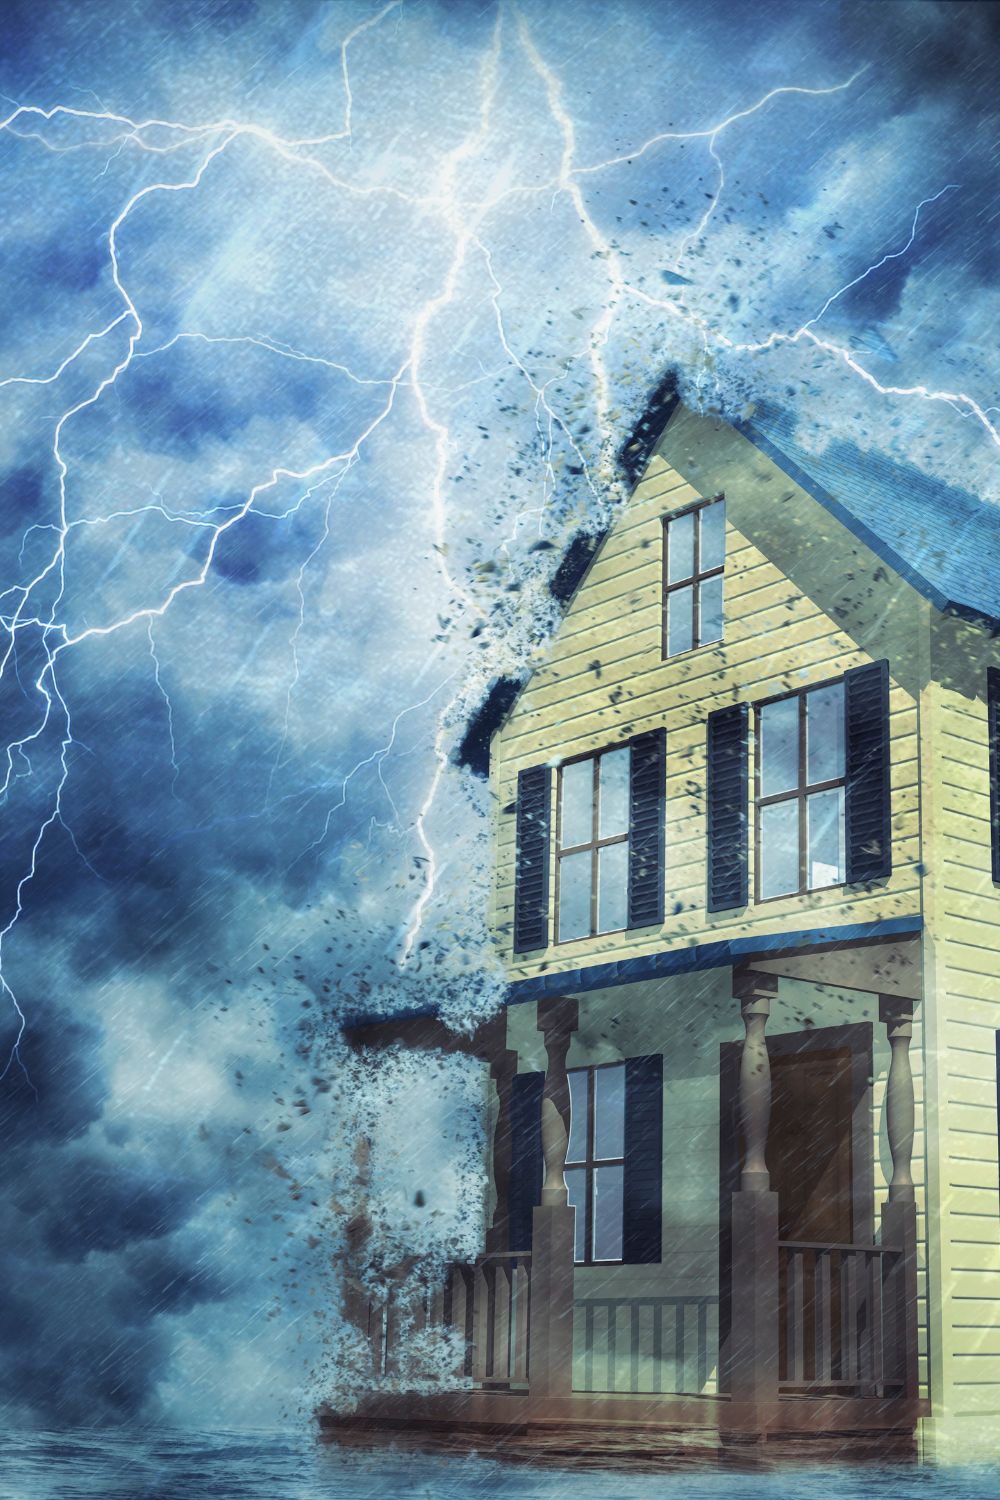 Easy Ways to Protect your Home from Natural Disasters